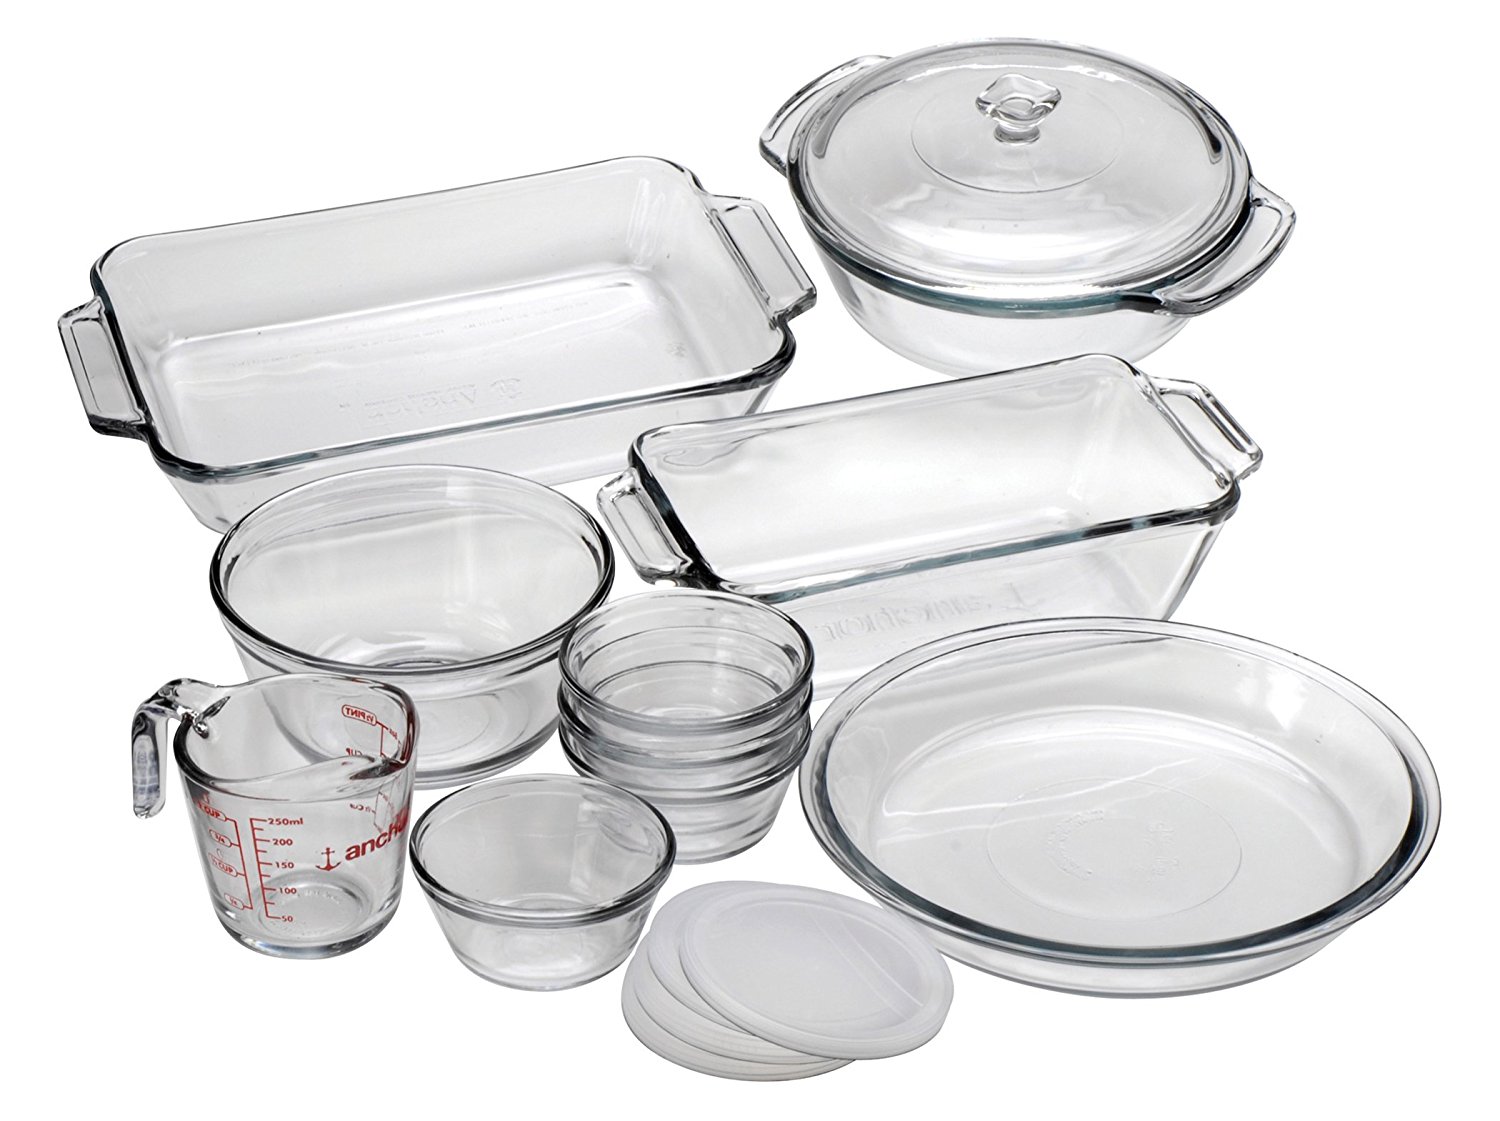 Anchor Hocking Oven Basics 15-Piece Glass Bakeware Set with Casserole